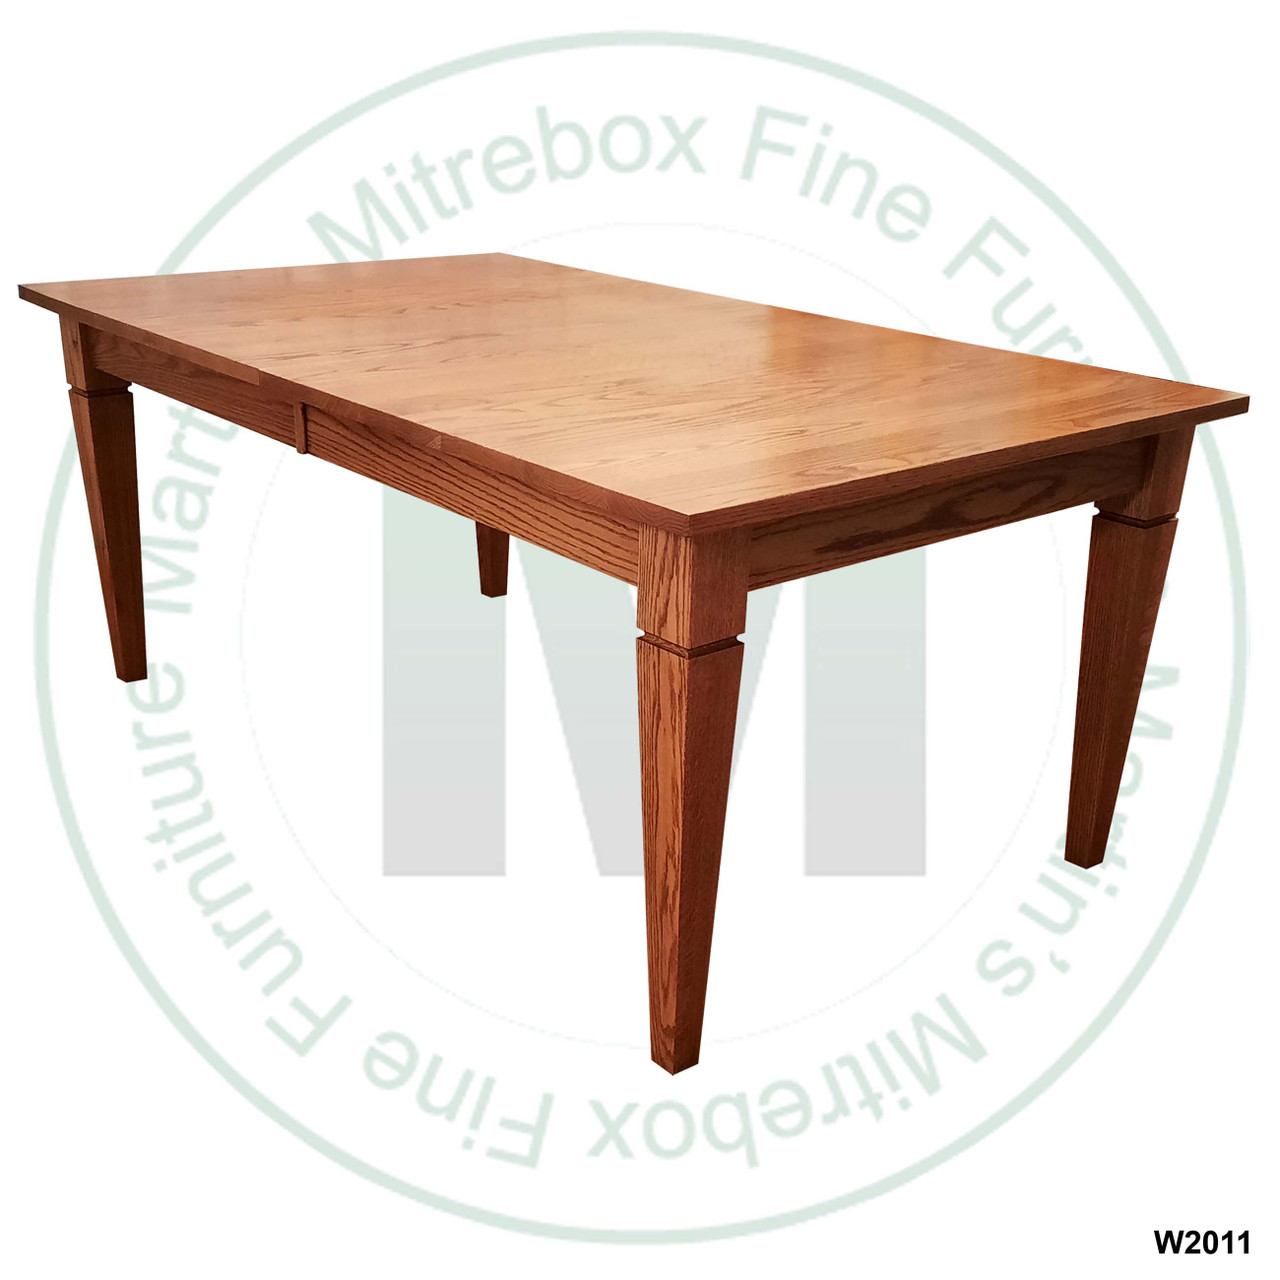 Oak Reesor Solid Top Harvest Table 48''D x 60''W x 30''H Table Has 1 3/4'' Thick Top And 2 - 16'' Extensions